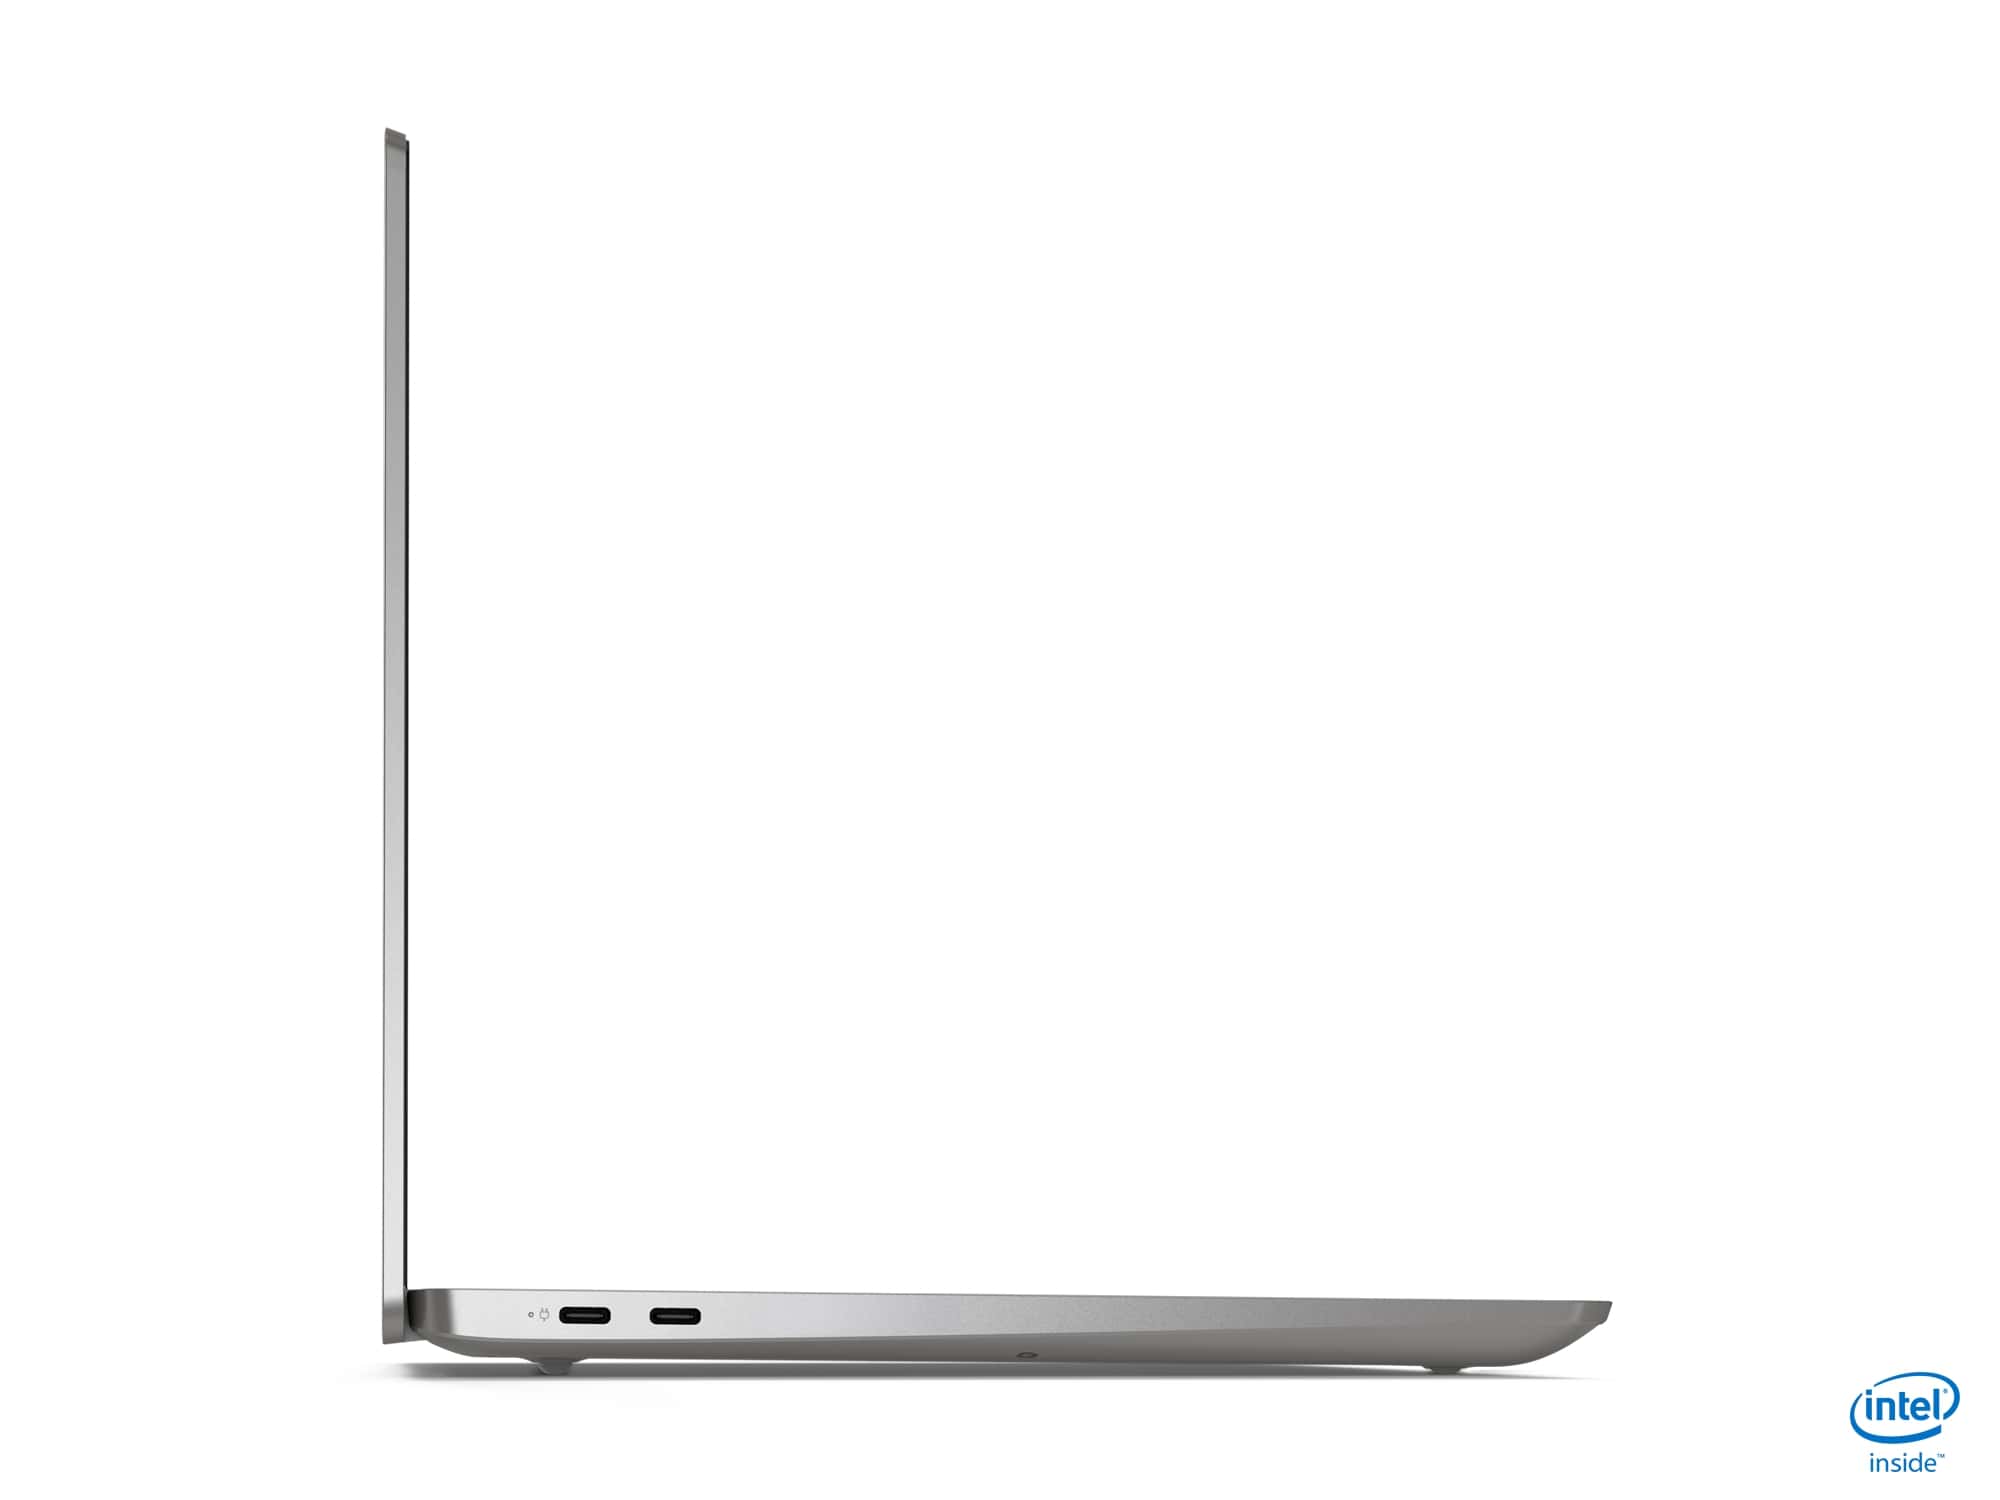 lenovo takes on xps 13 with ideapad s540 13inch side profile intel silver